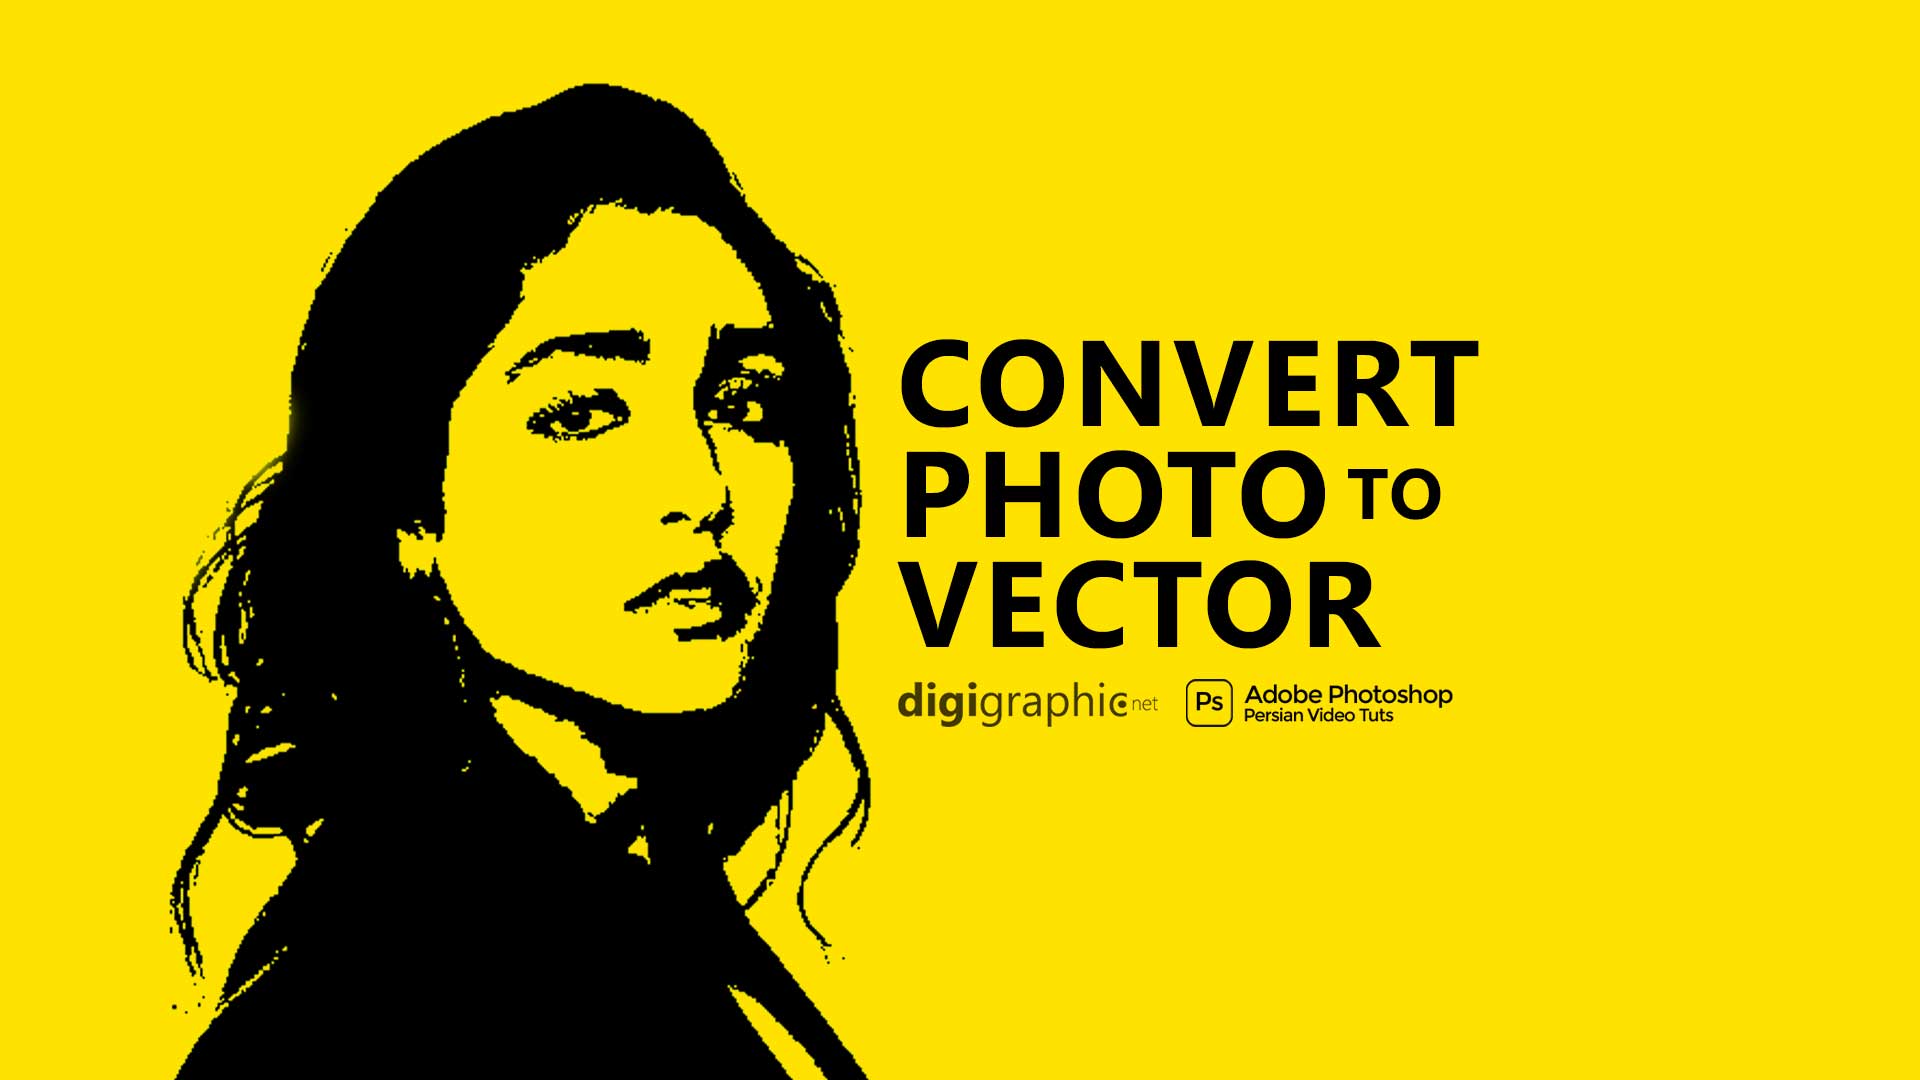 Convert Photo to Vector in Photoshop & Corel Draw